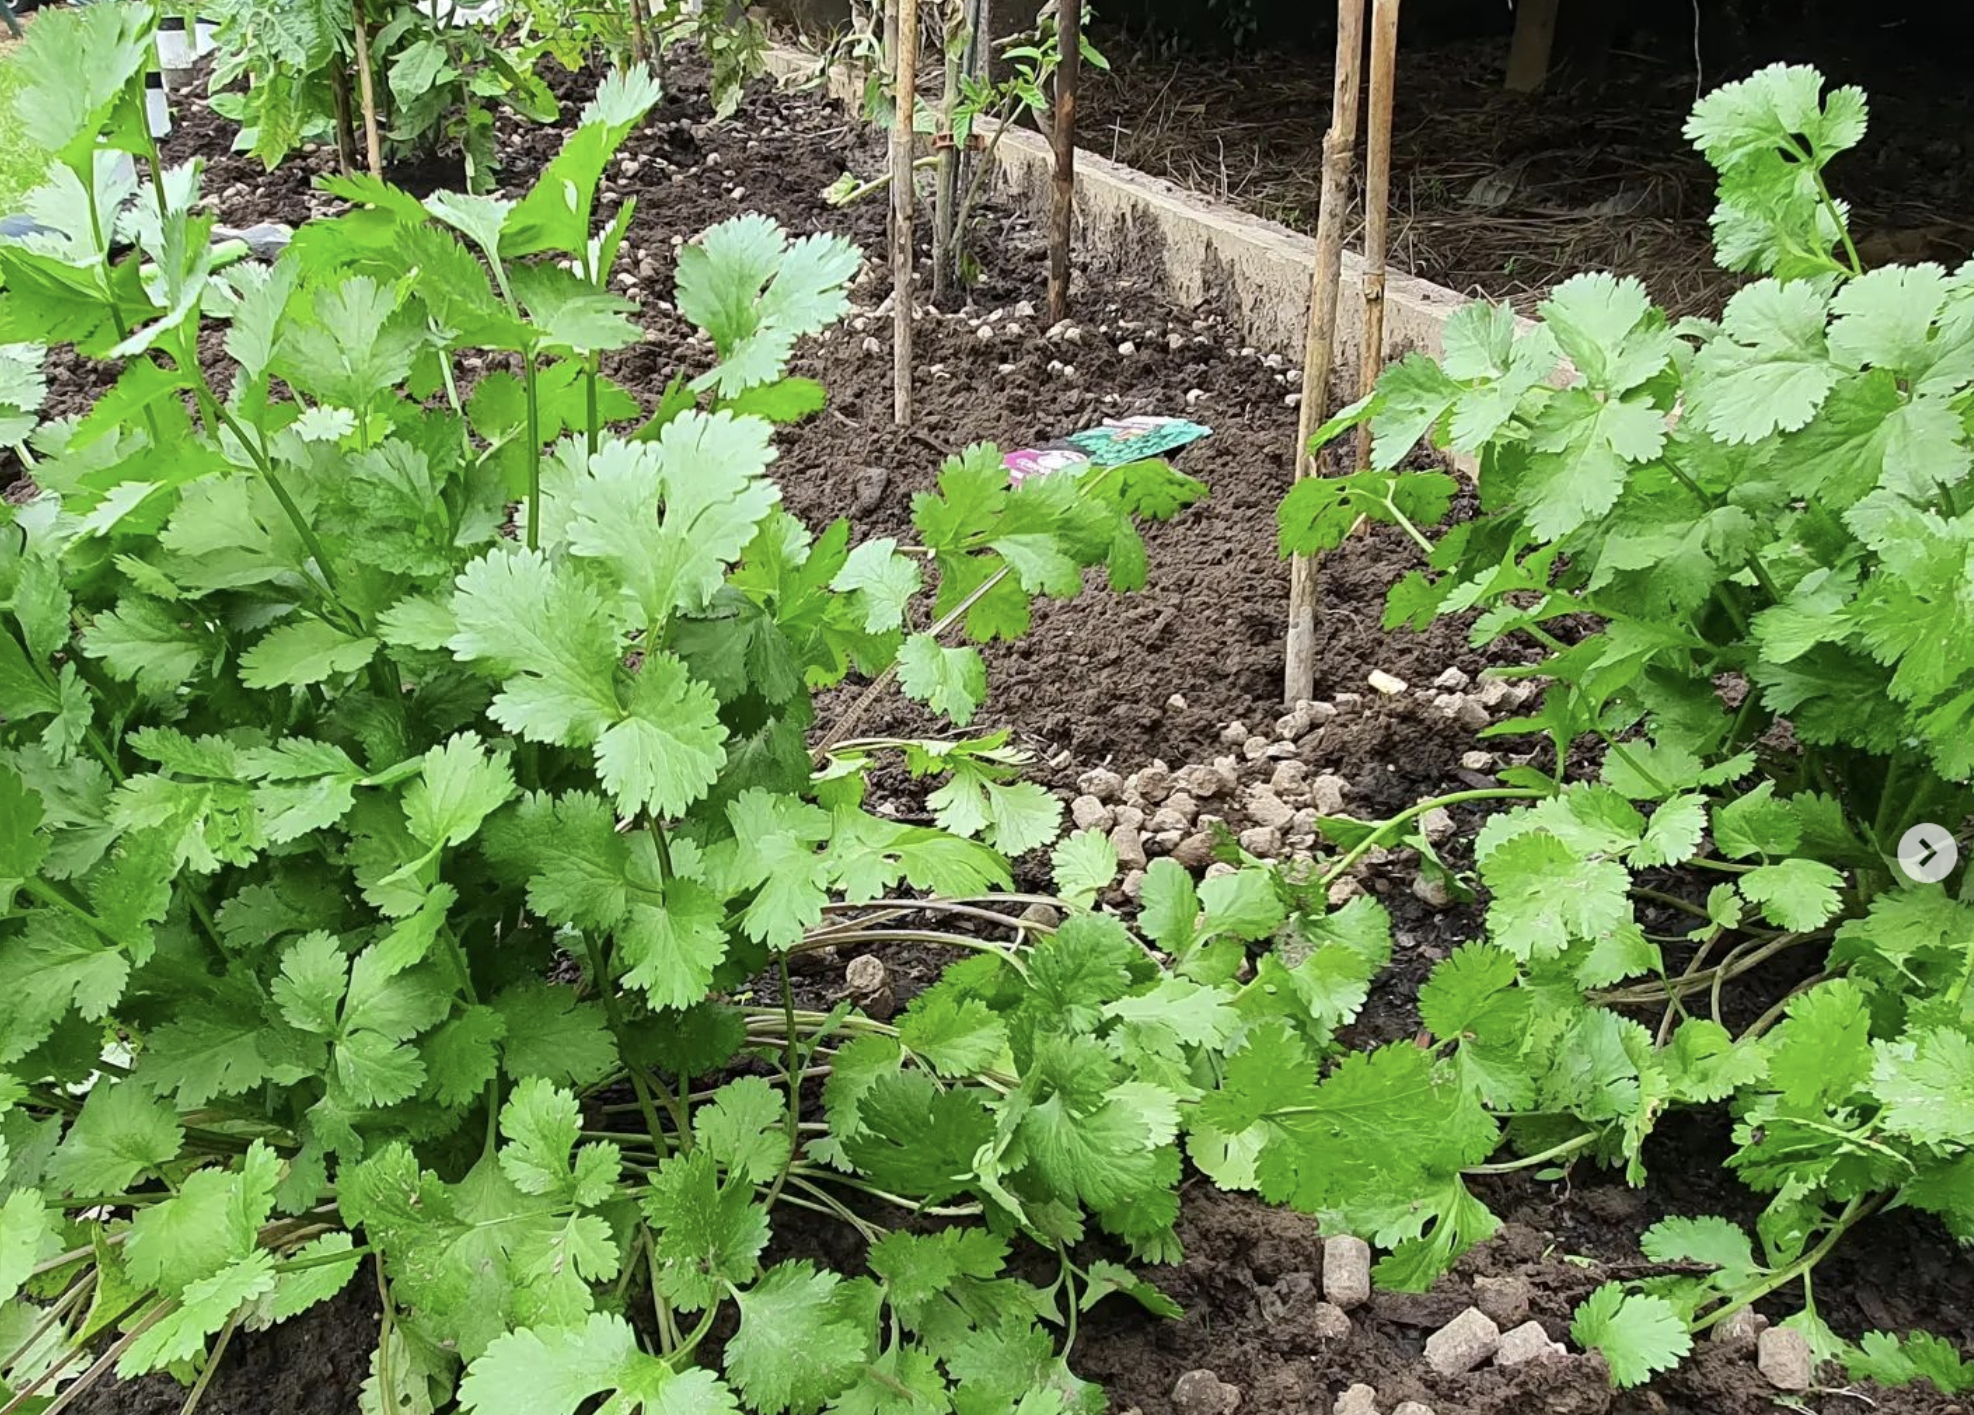 Rows of healthy celery plants growing in a home garden with rich, dark soil. The plants are green and lush, spaced out with wooden stakes supporting their growth.